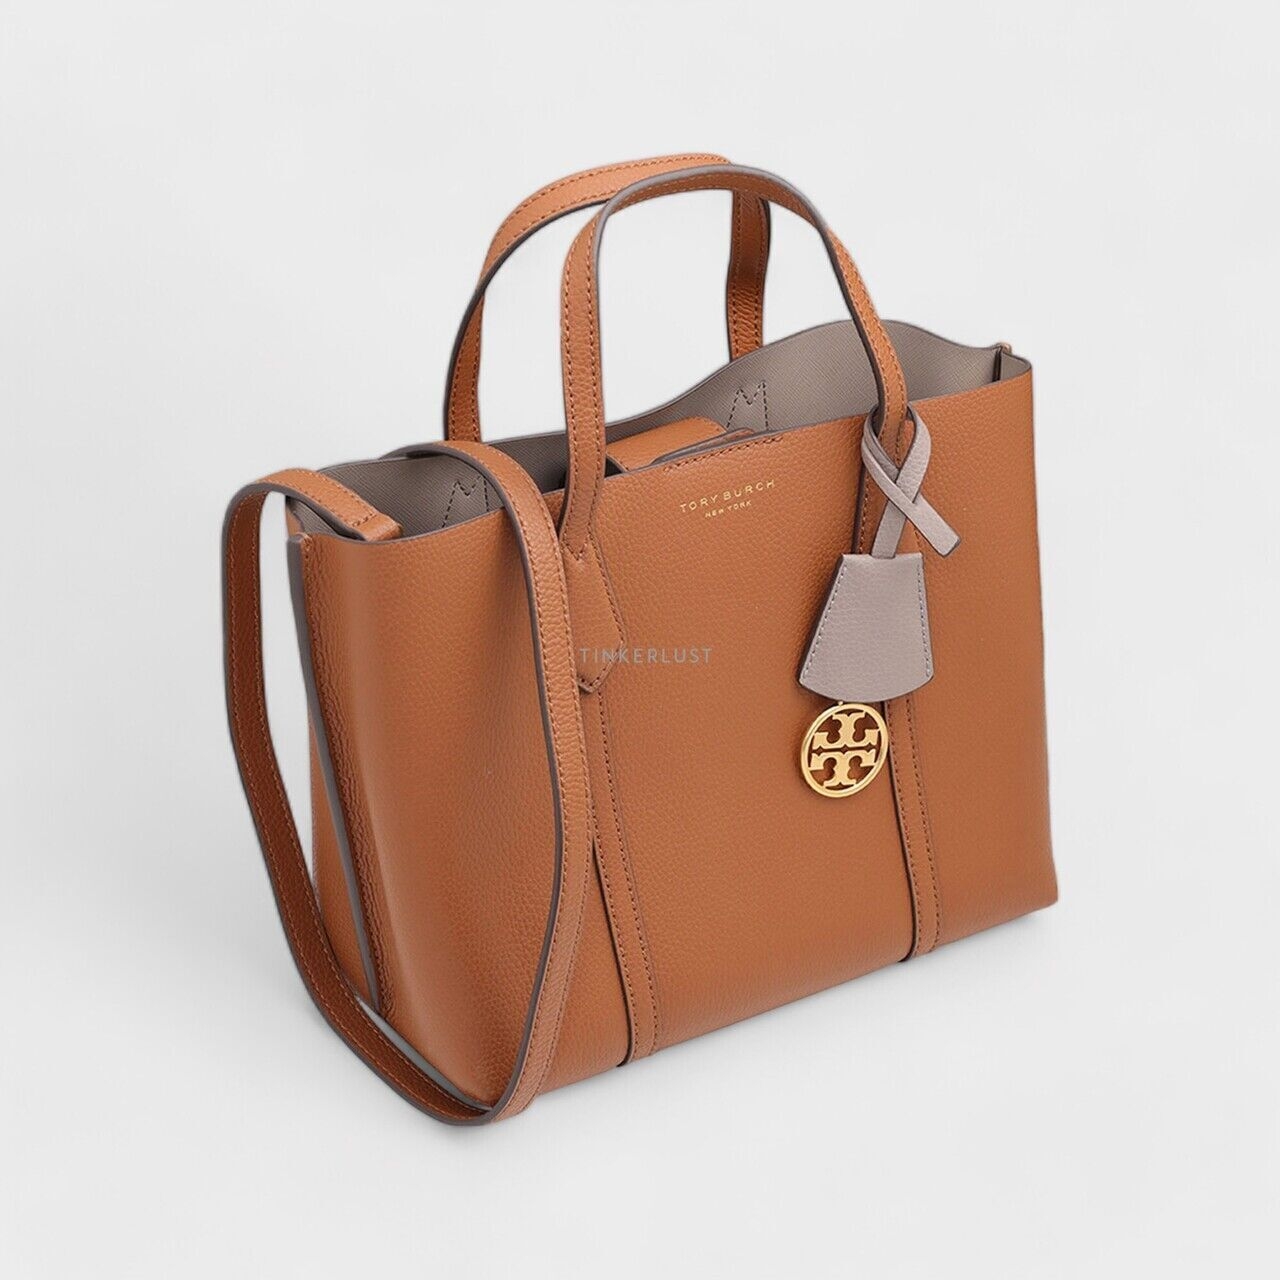 Tory Burch Small Perry Color Block Triple Compartment in Light Umber Multicolors Satchel Bag